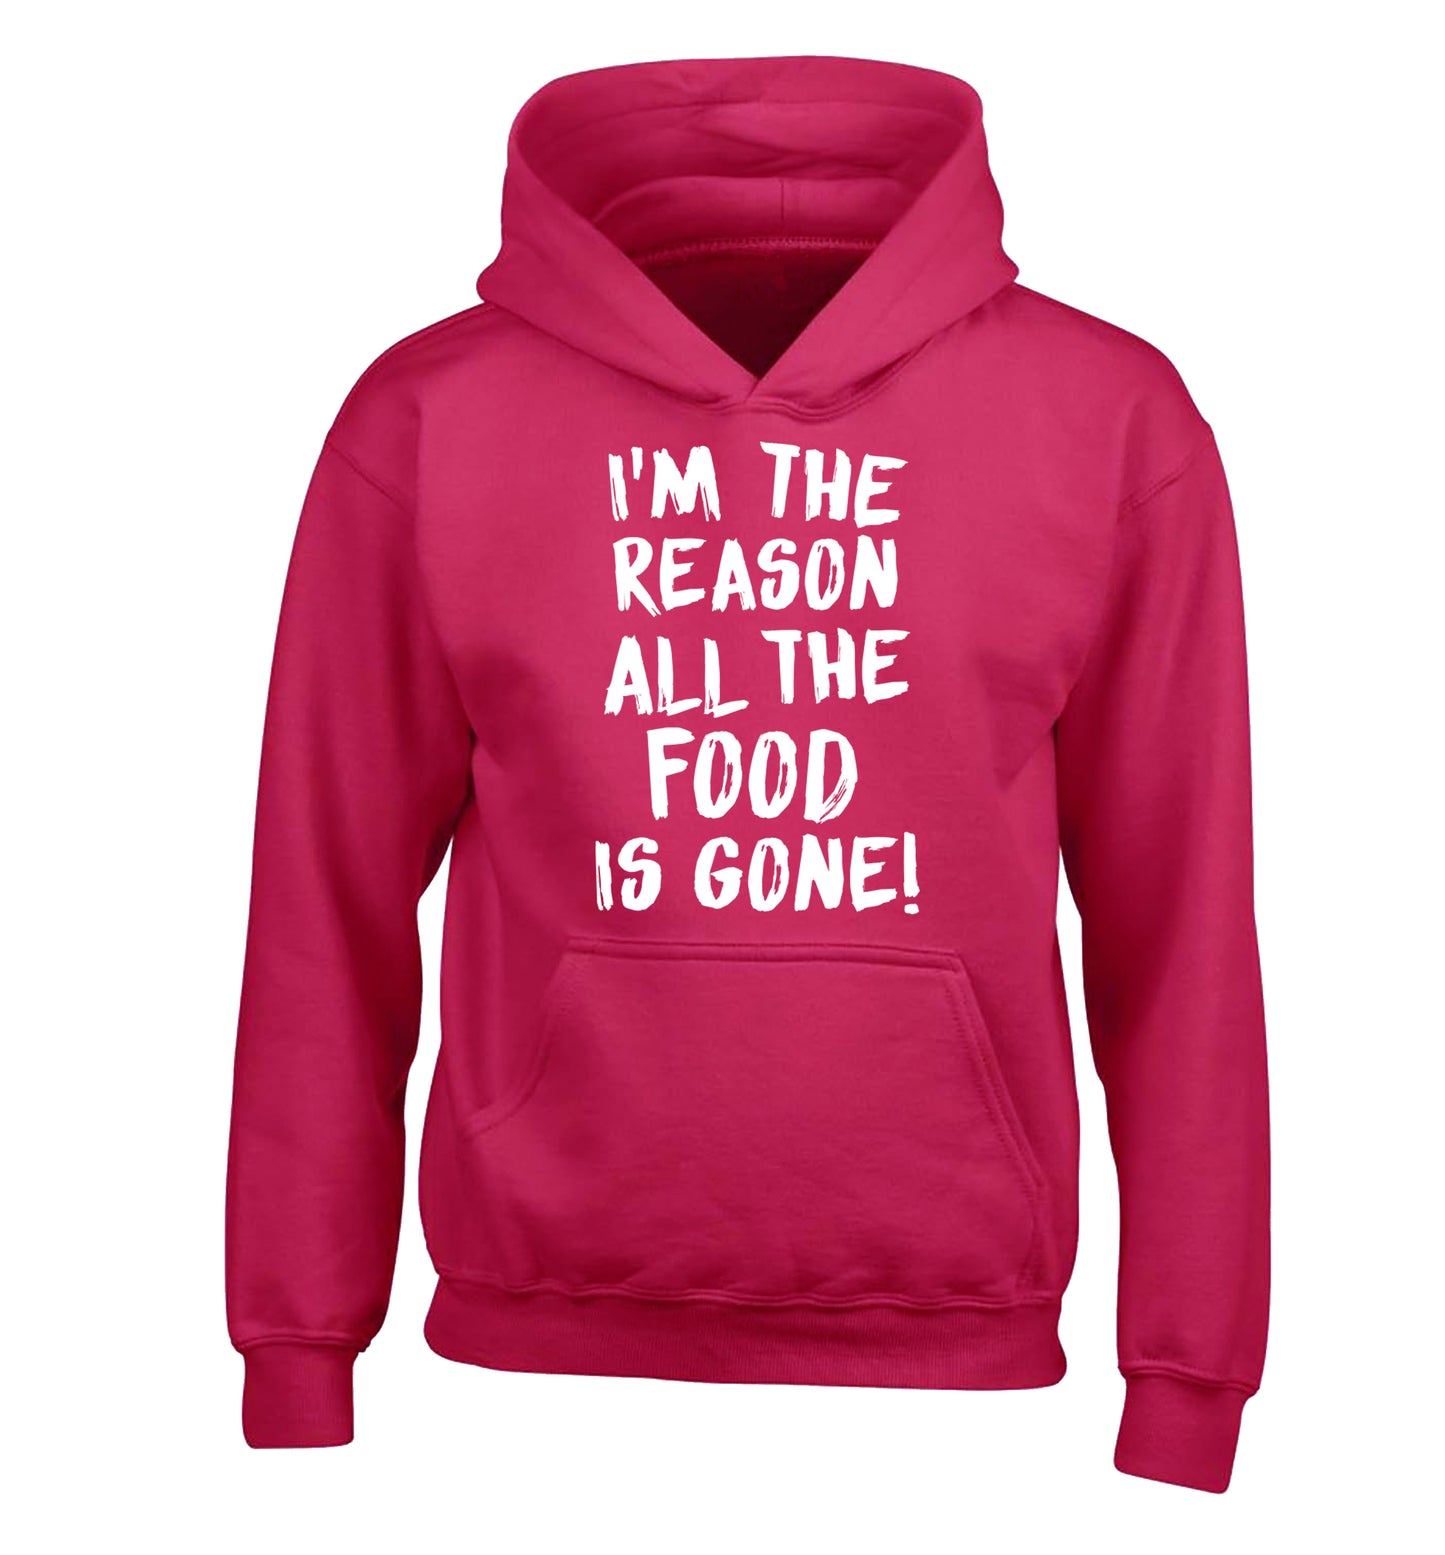 I'm the reason why all the food is gone children's pink hoodie 12-13 Years